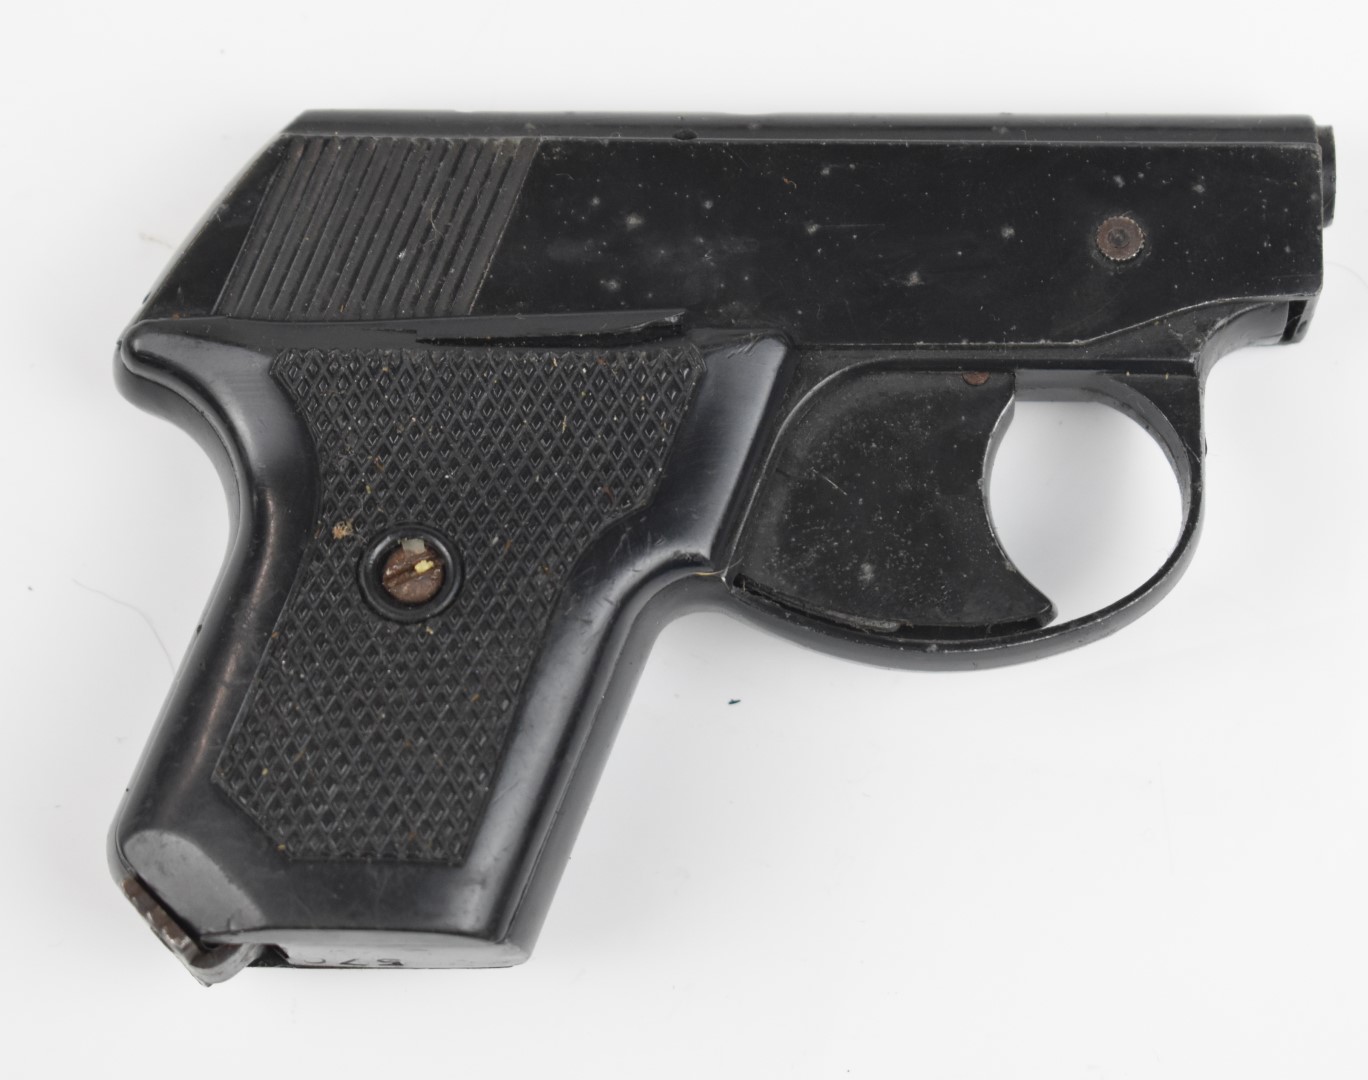 Eight replica or blank firing pistols and revolvers including Luger, StripMatic etc. - Image 6 of 9